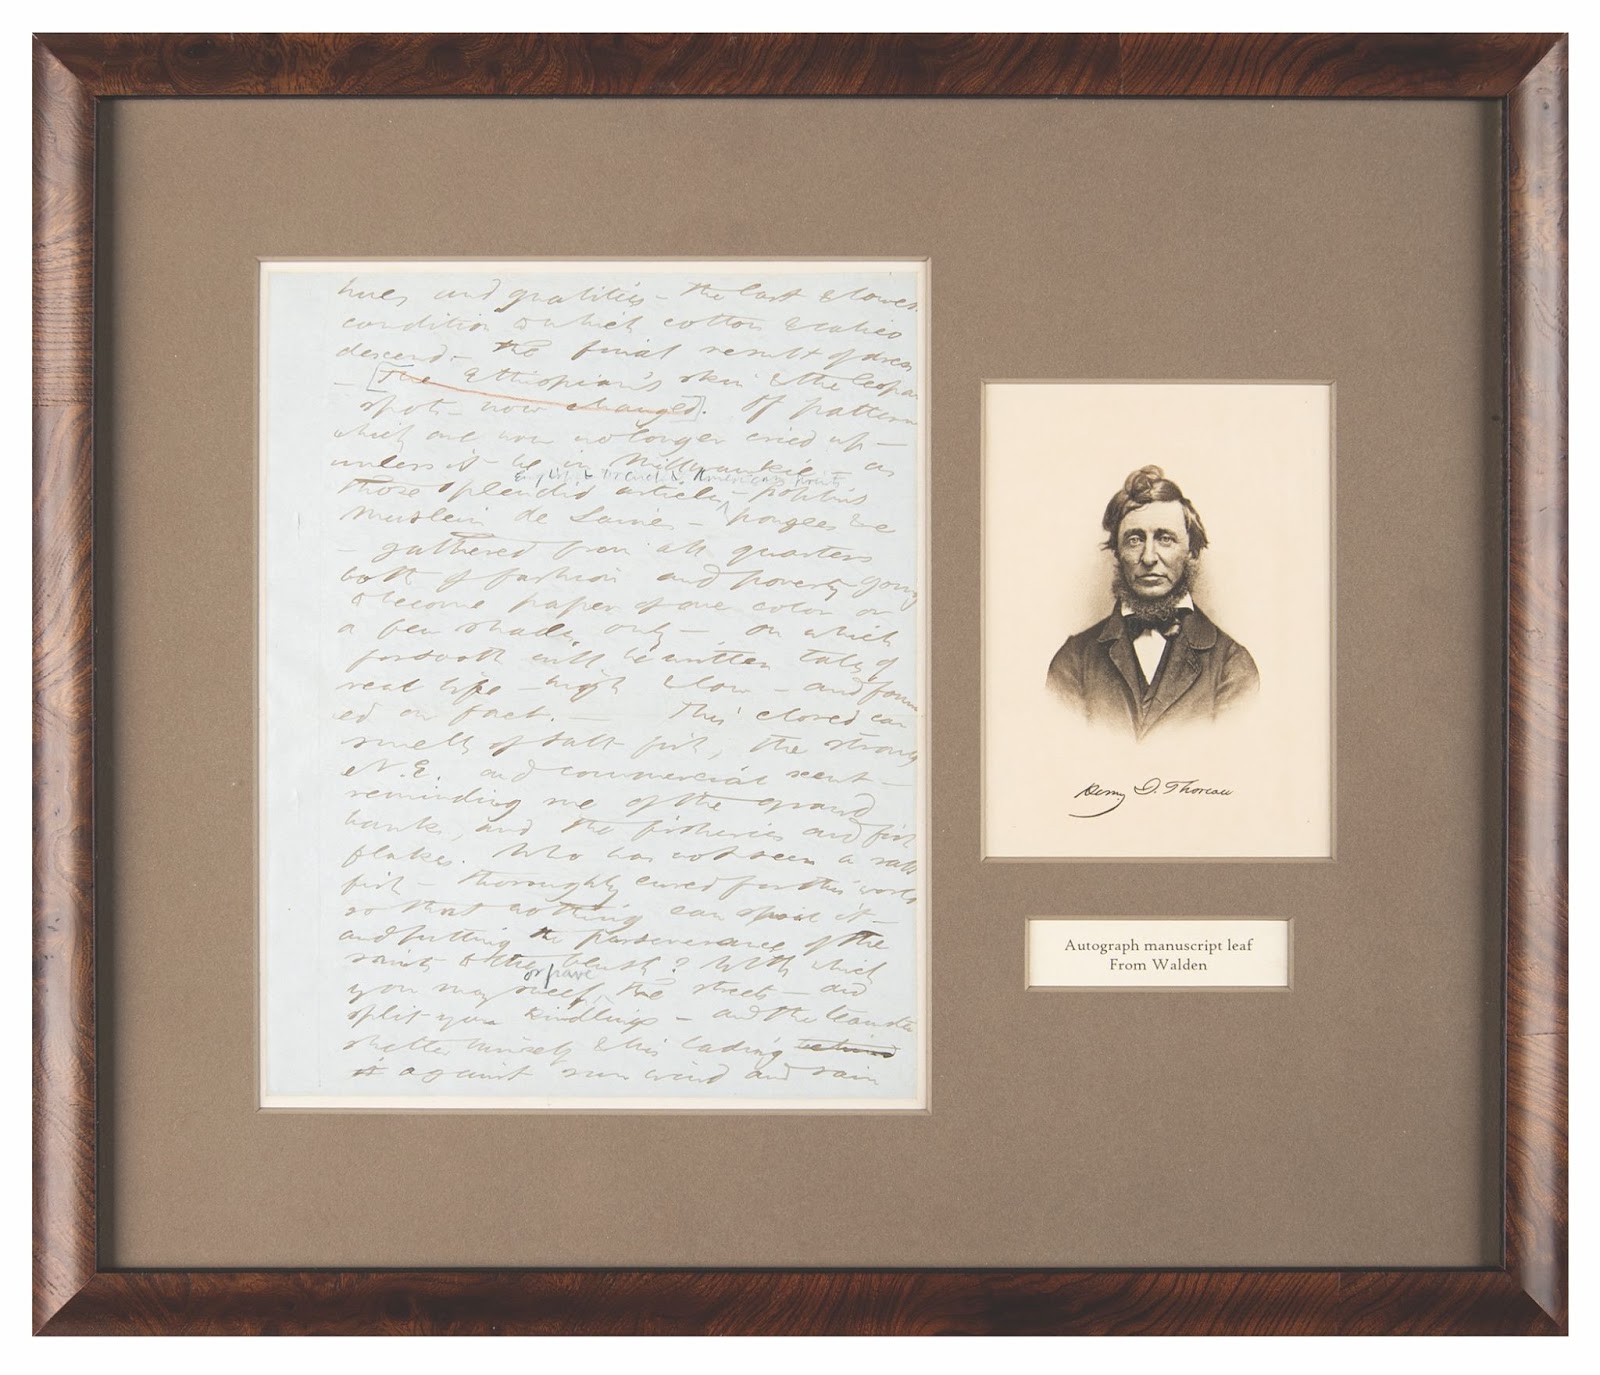 Handwritten manuscript page from Henry David Thoreau’s draft of Walden, mounted next to a photo of the author.